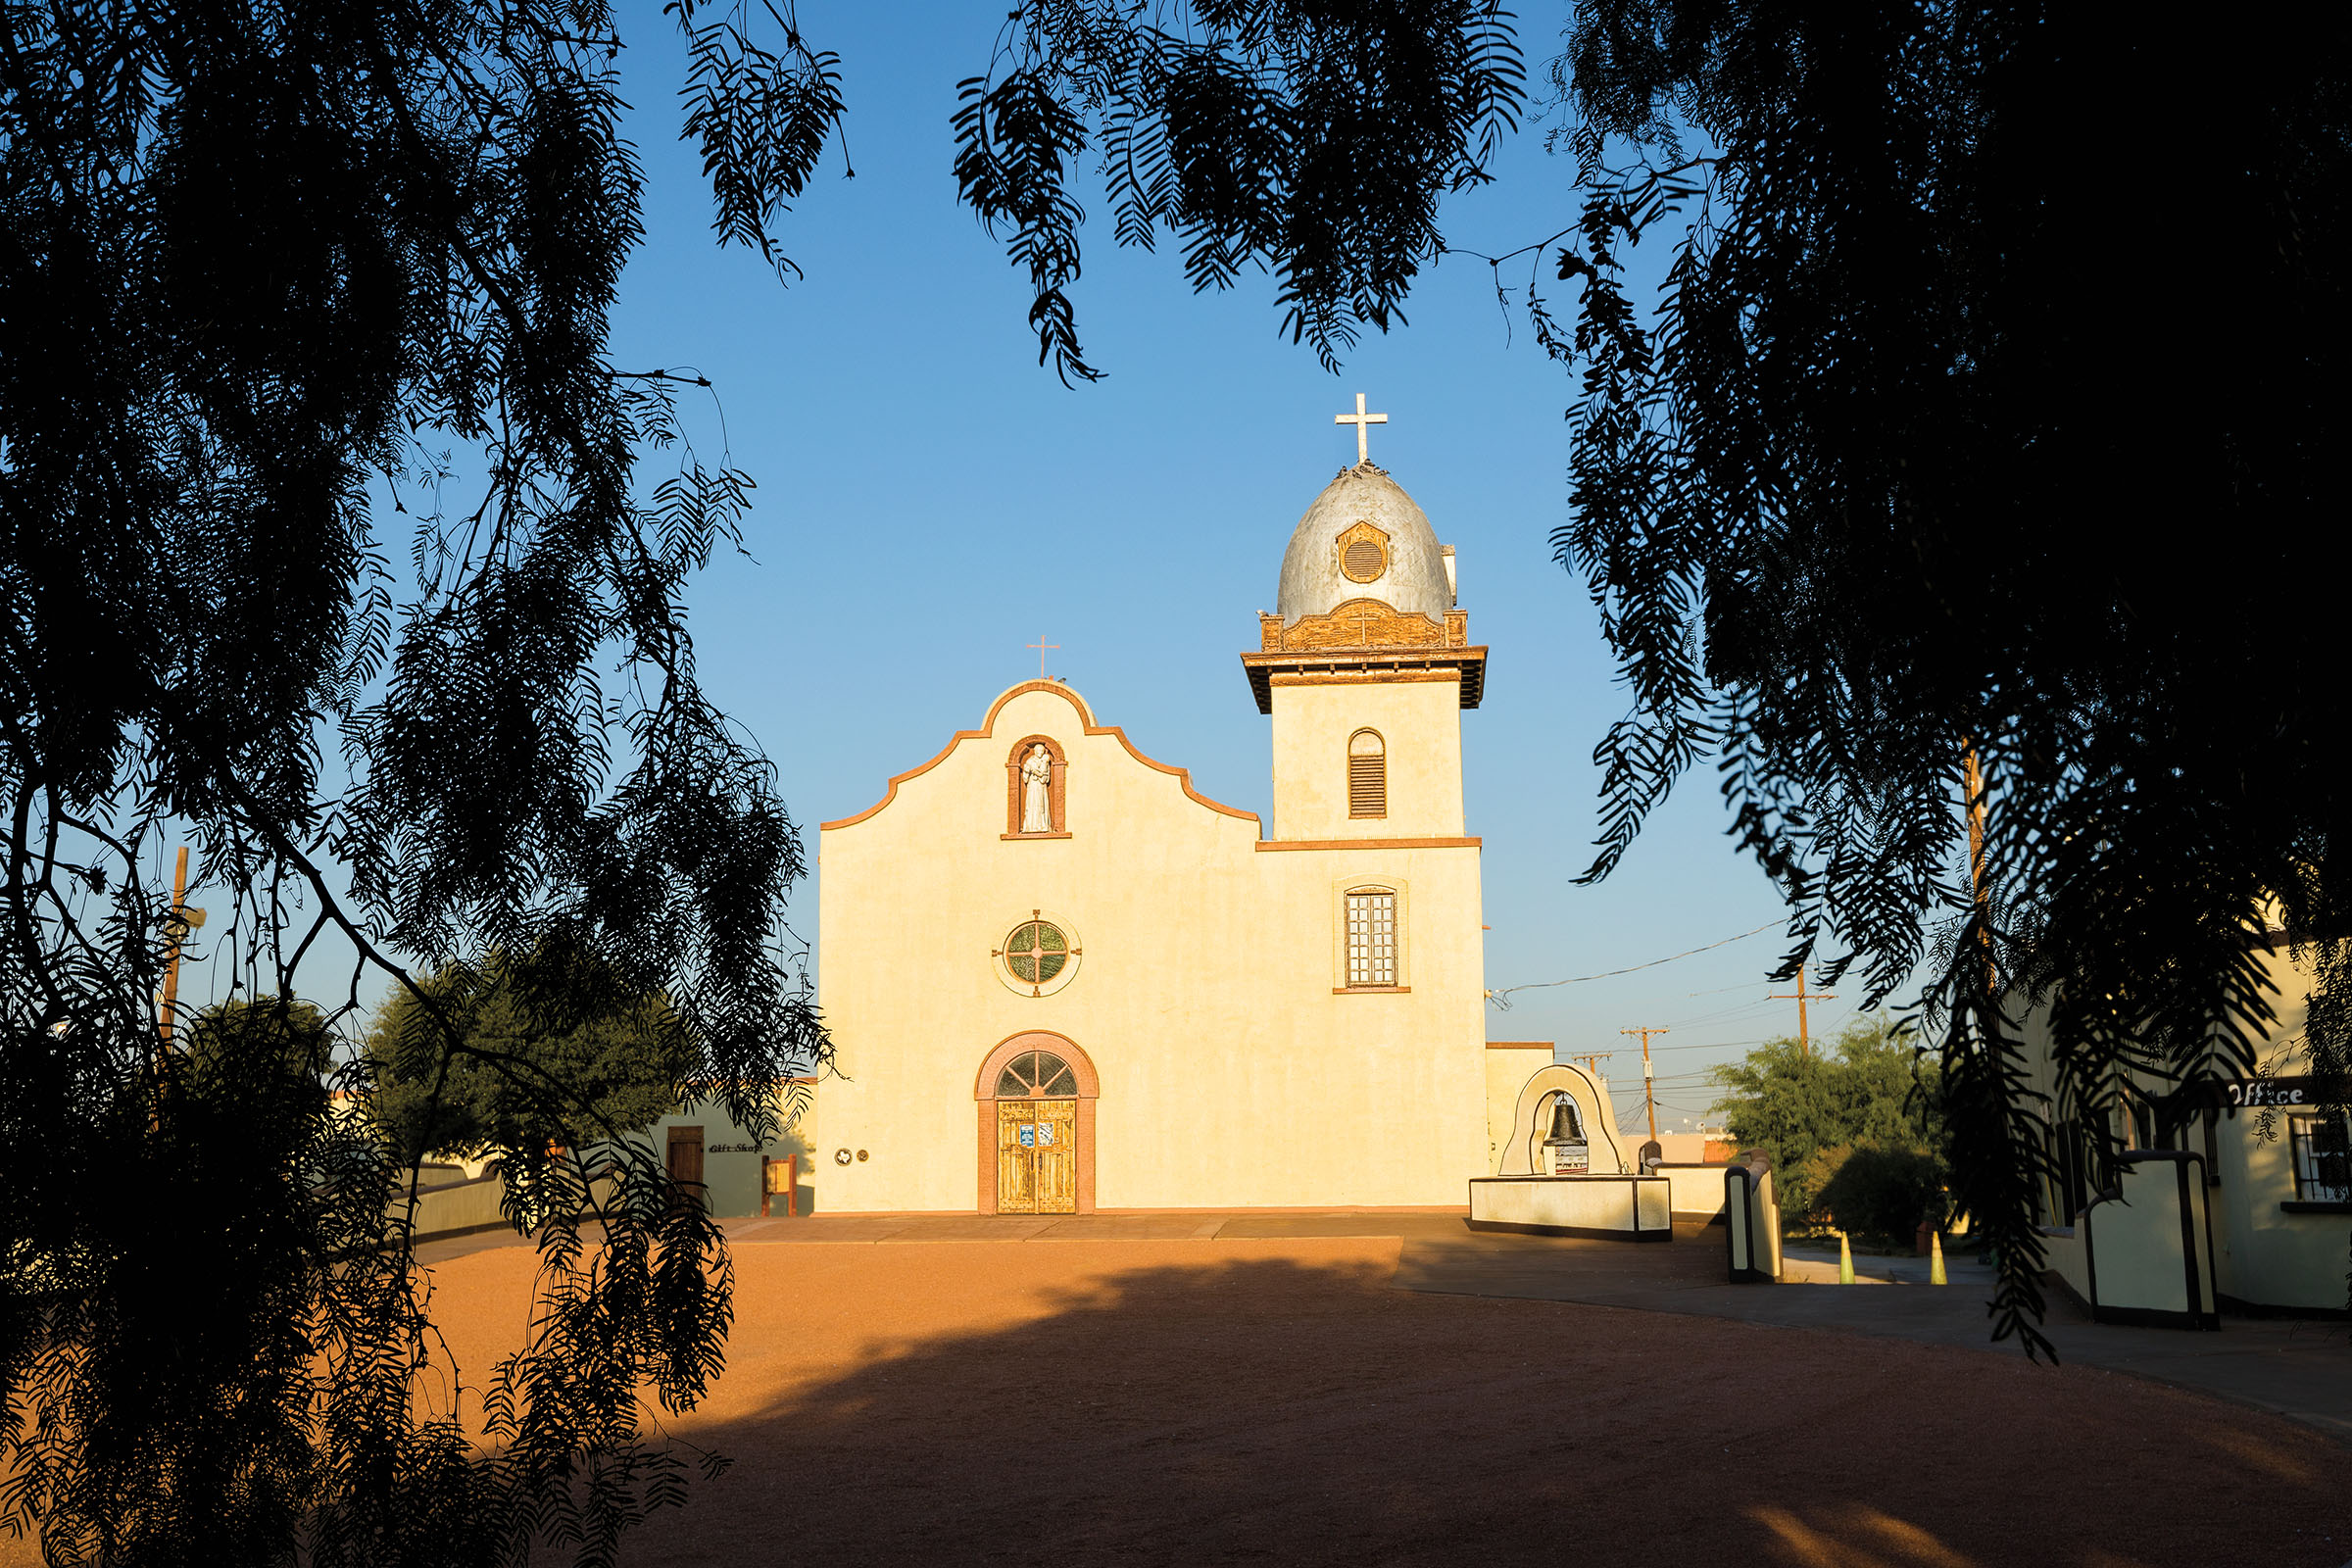 The sun shines dow on an adobe-walled mission building with golden trim and a white cross in front of a dark tree